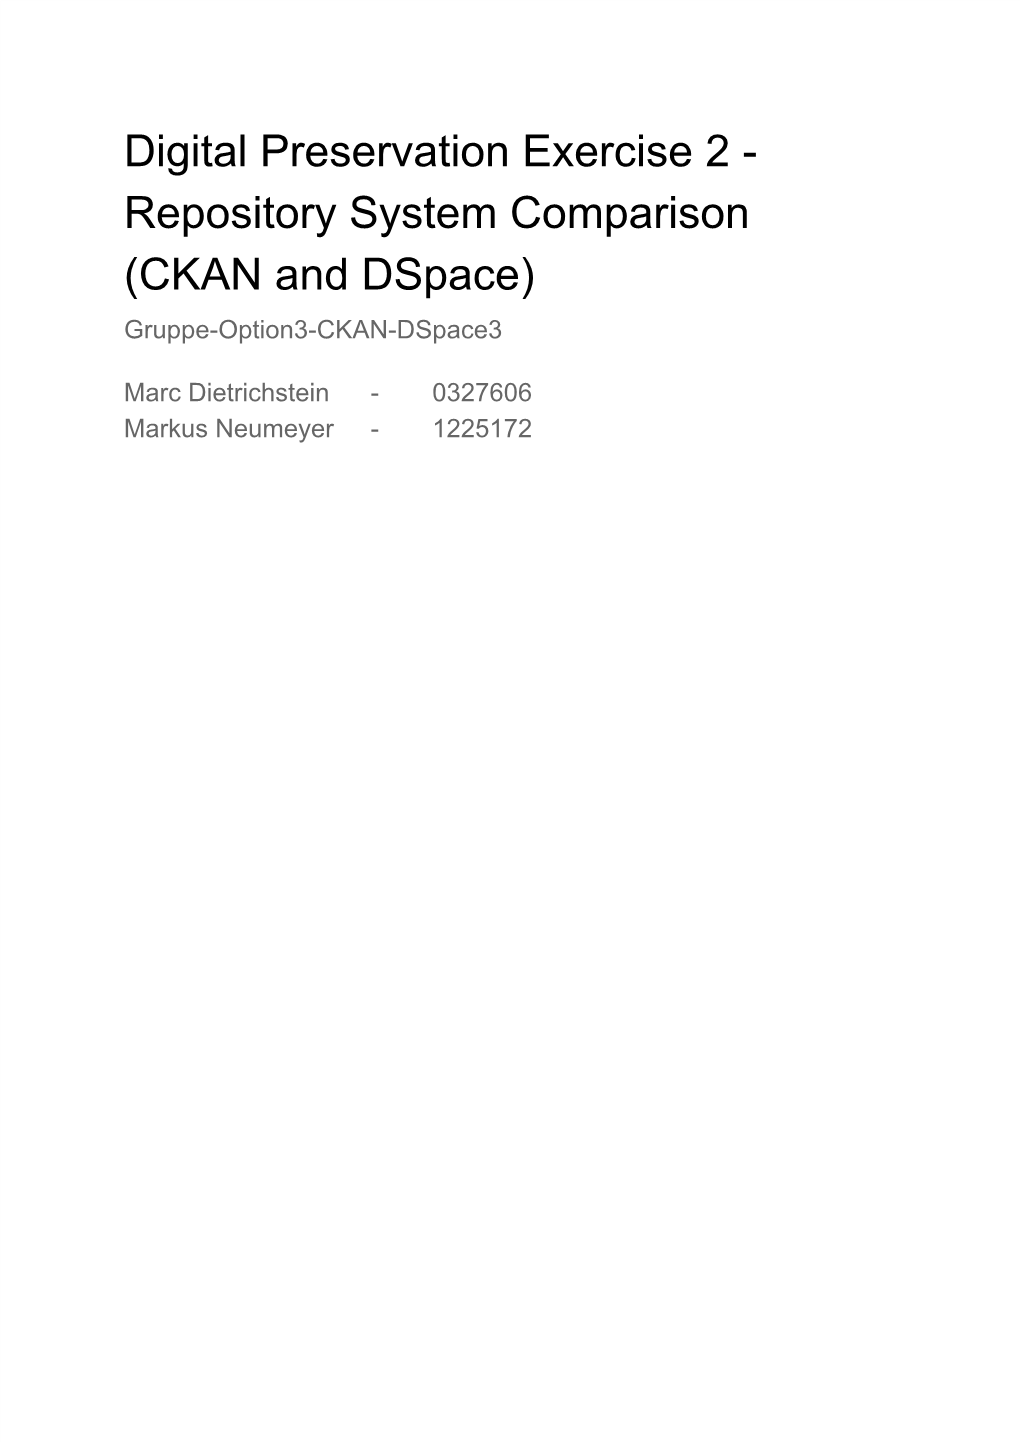 CKAN and Dspace) Gruppe-Option3-CKAN-Dspace3